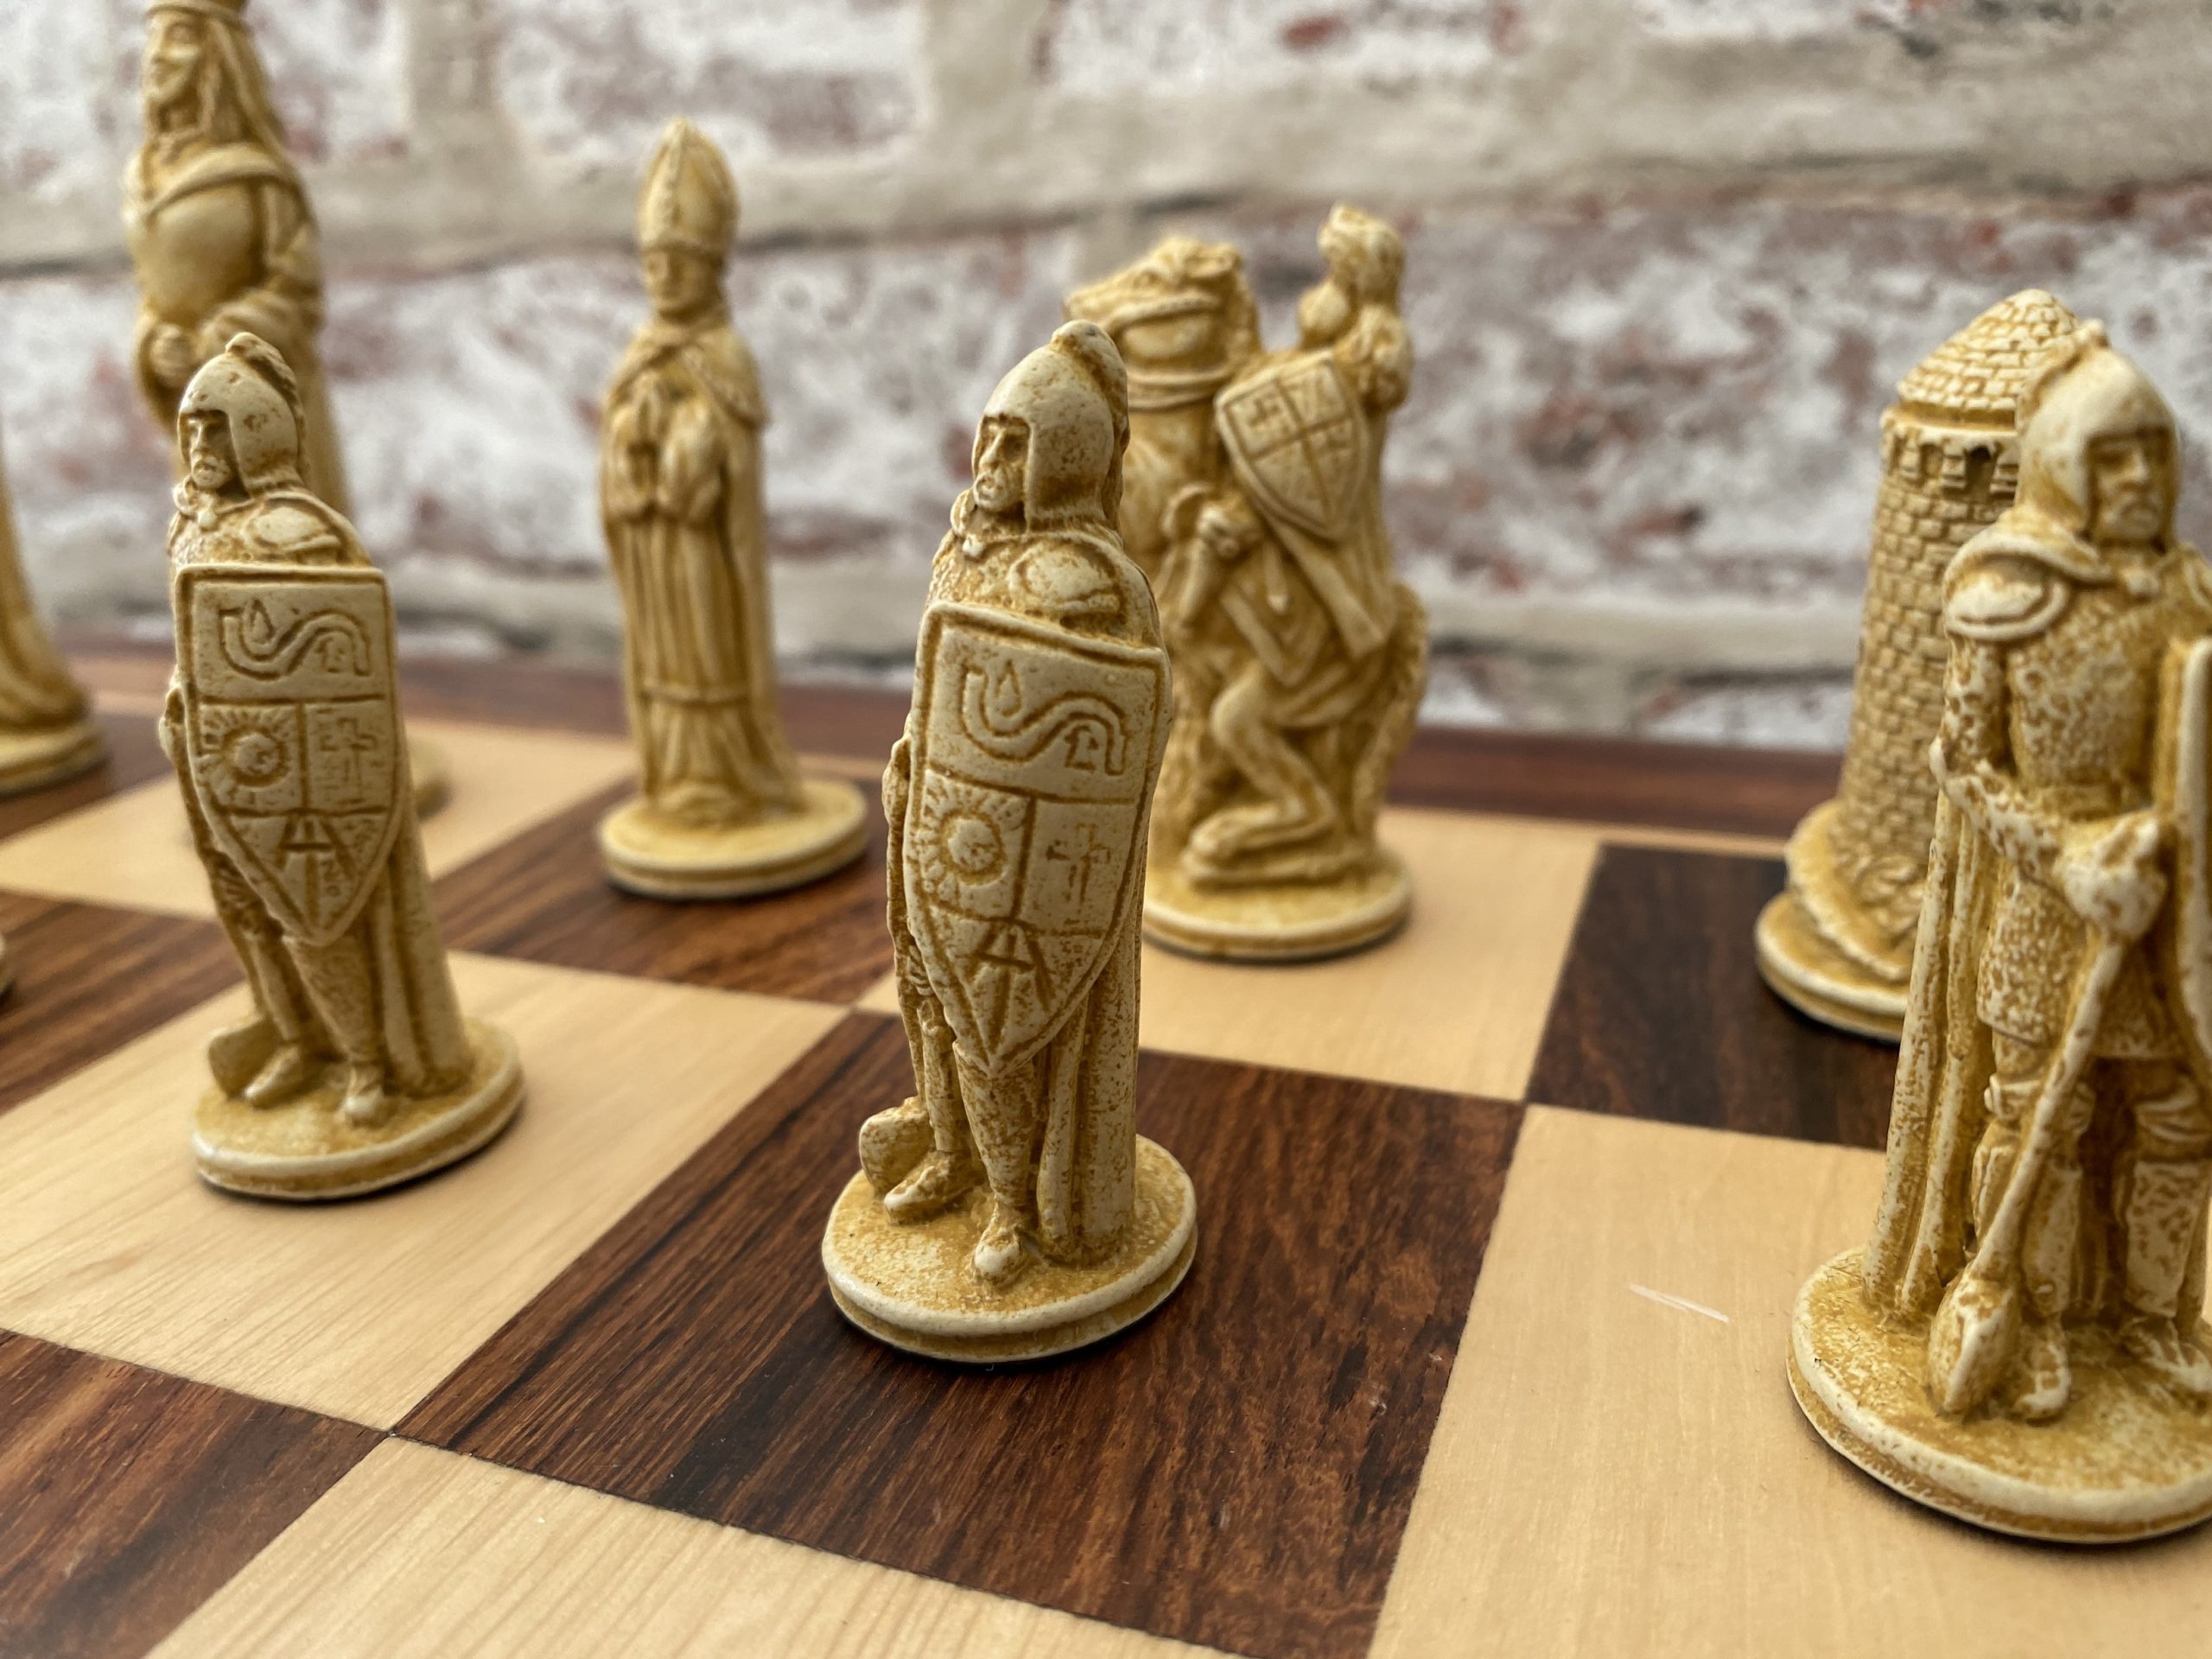 Camelot Chess Pieces by Berkeley - Cardinal Red